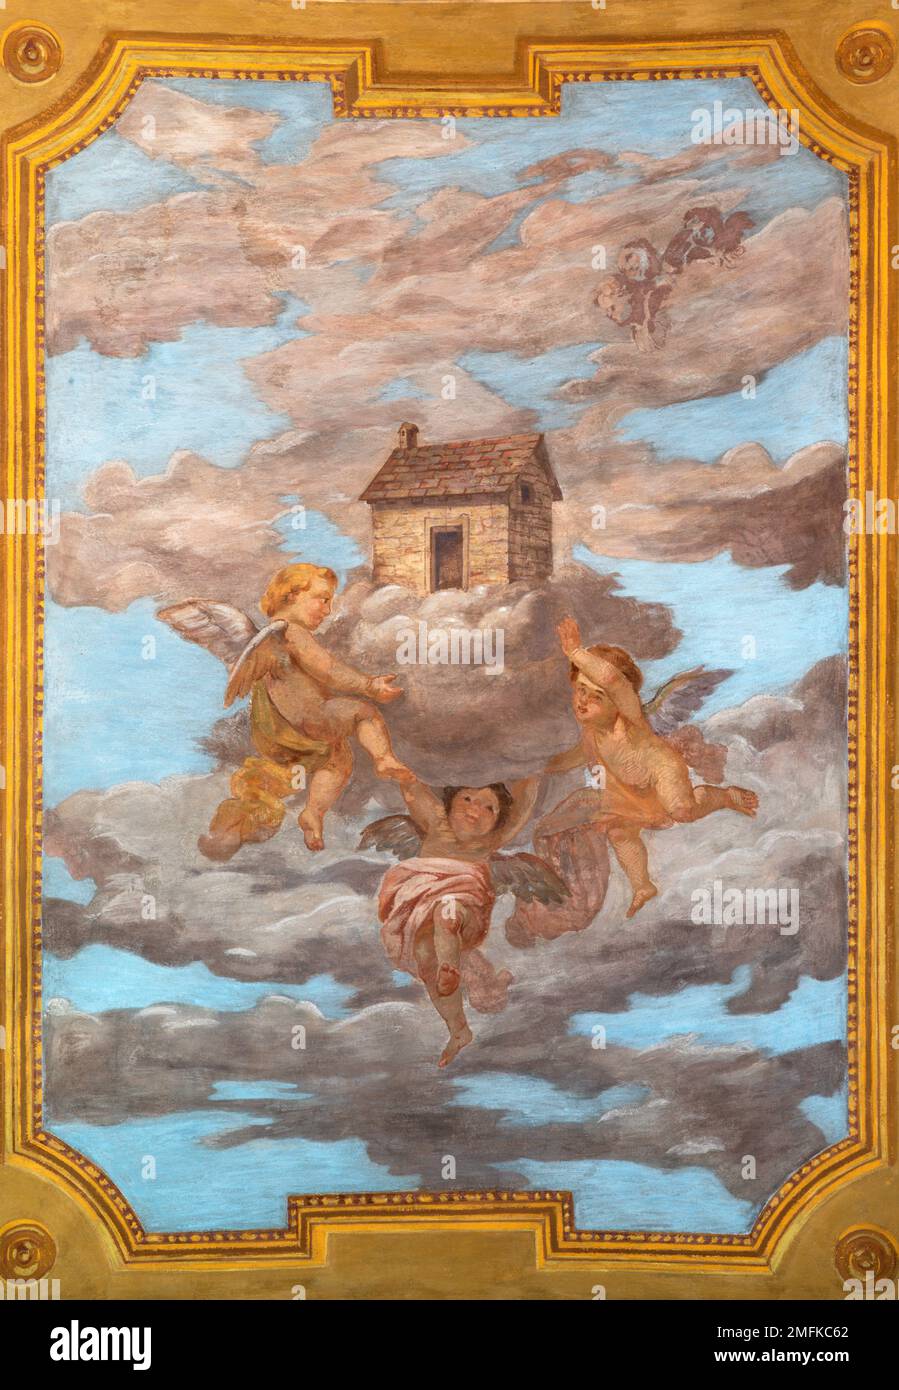 IVREA, ITALY - JULY 15, 2022: The ceiling fresco of angels with House of Nazareth in the church Chiesa di San Salvatore by G. Silvestro (1914). Stock Photo